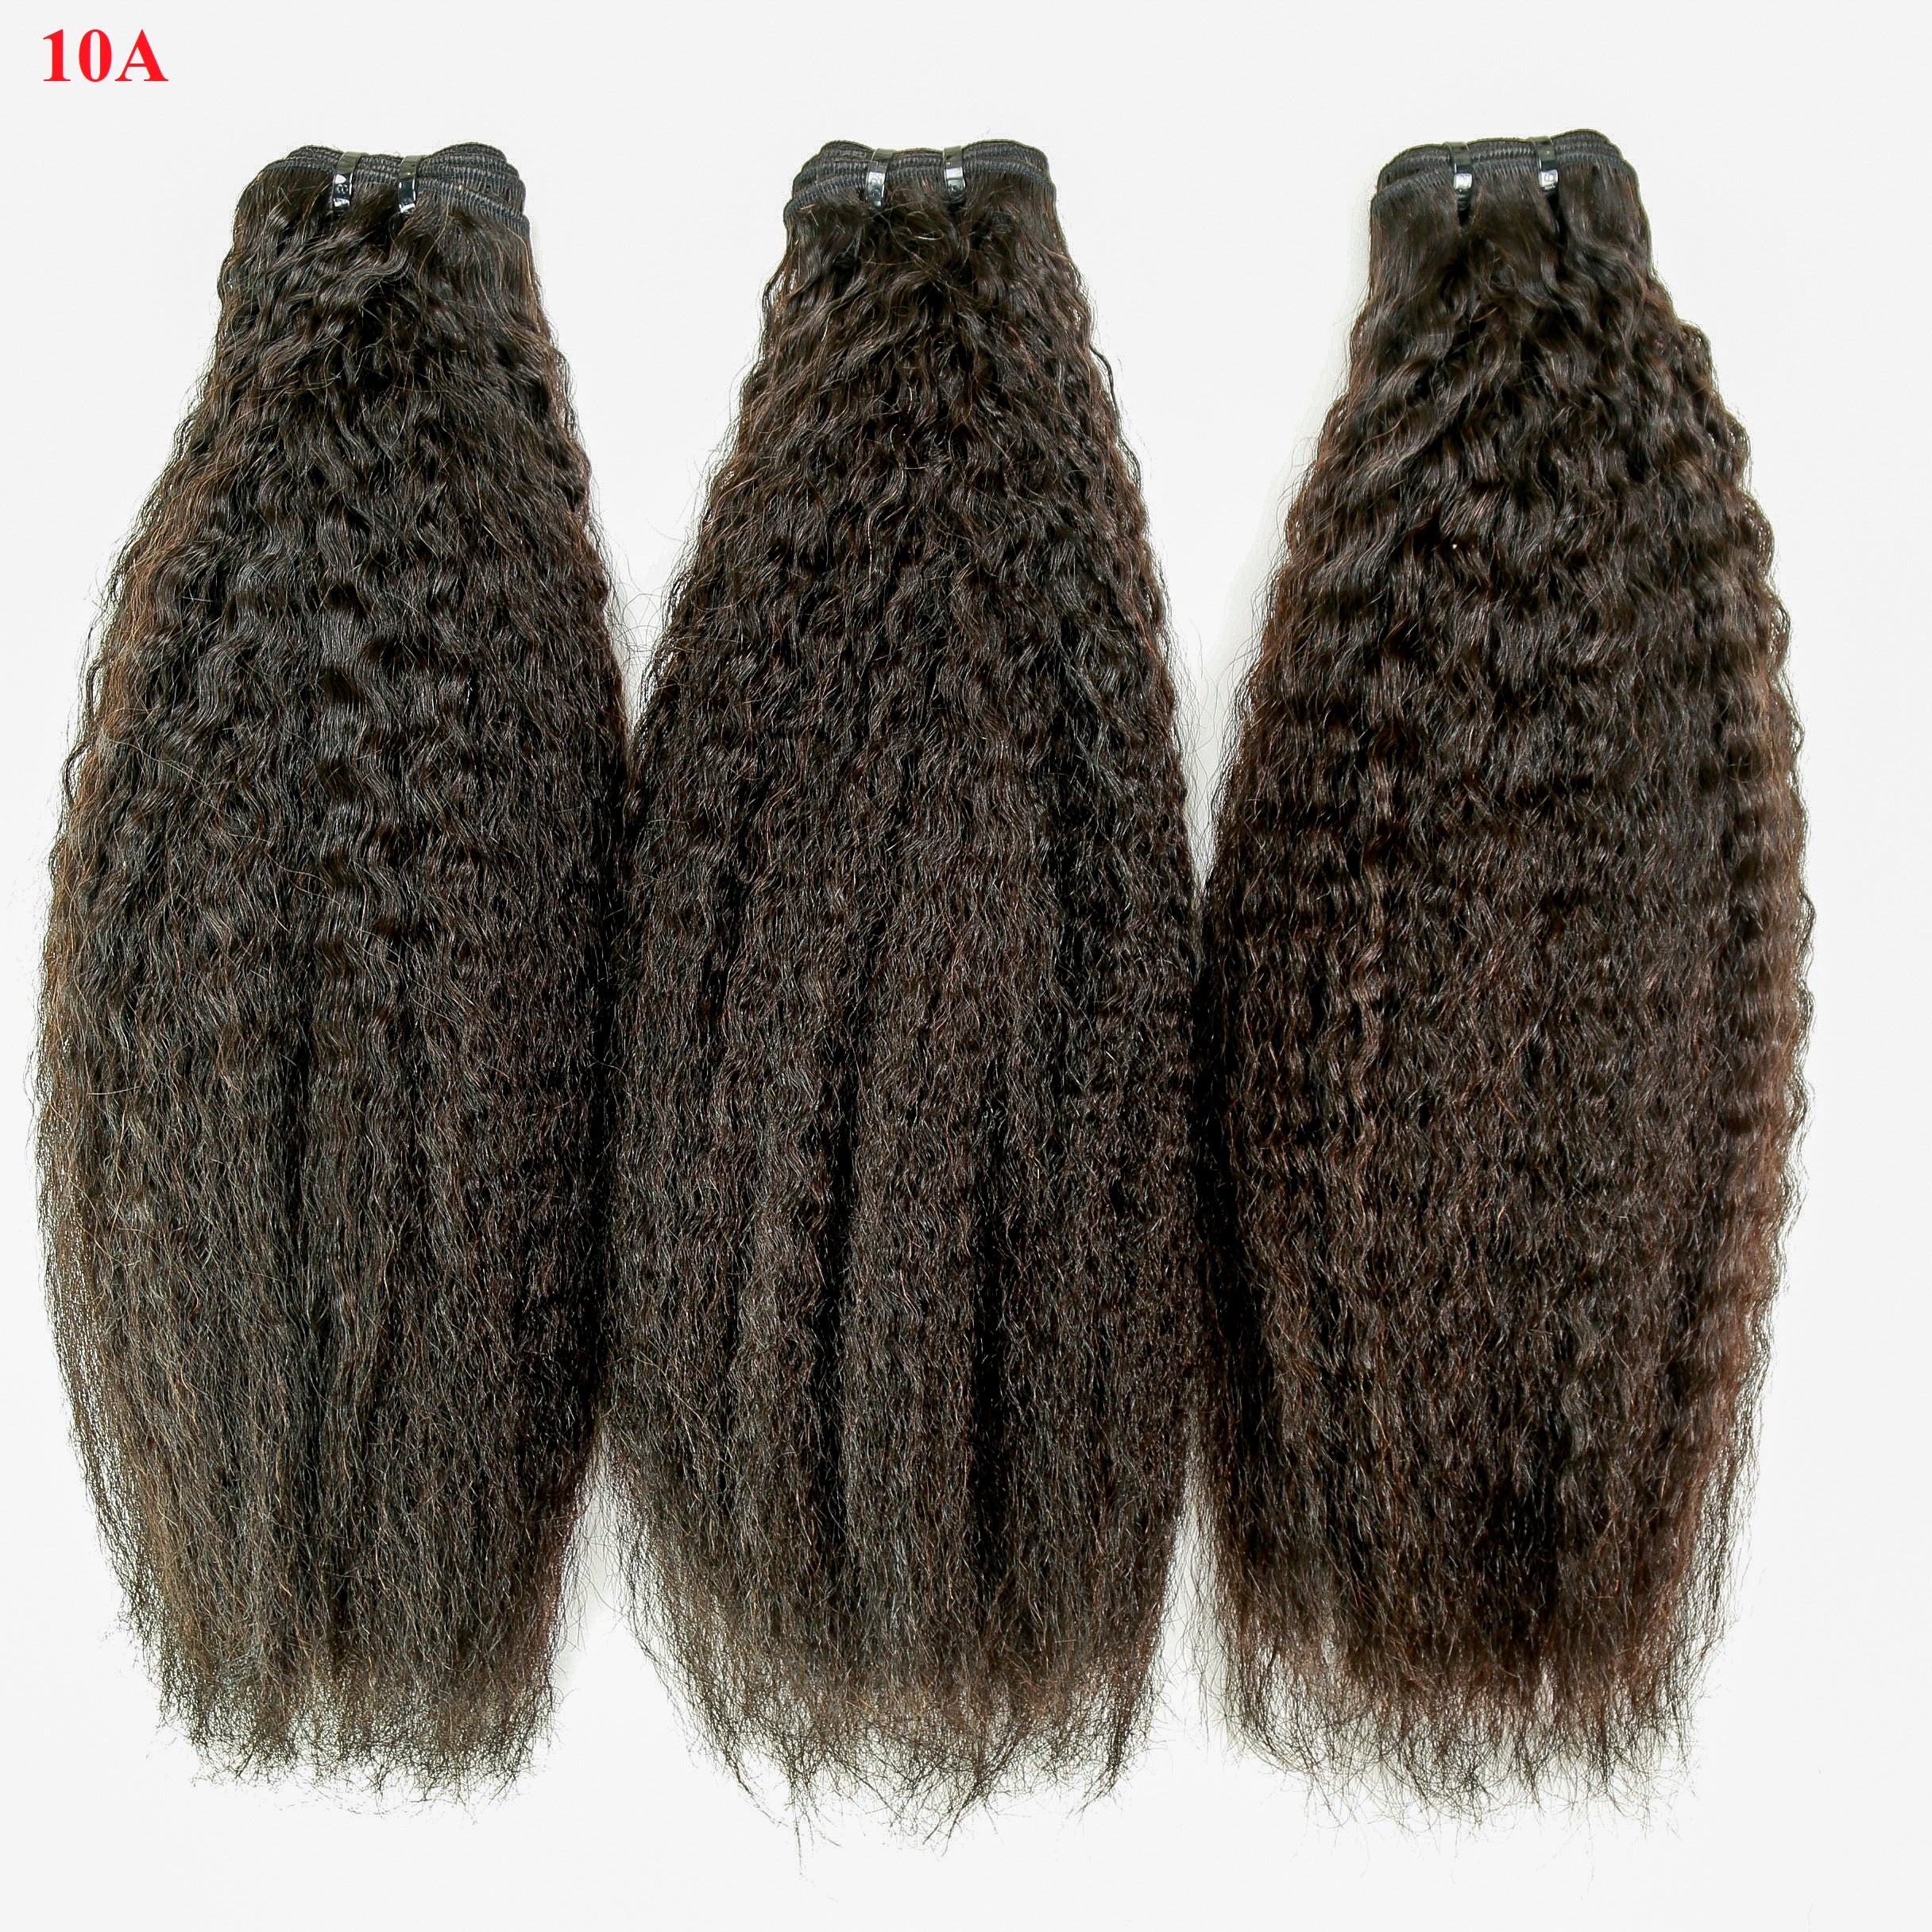 JP Hair 9A/10A/12A Kinky Straight Human Hair 3 Bundles with 13x4 Lace Frontal